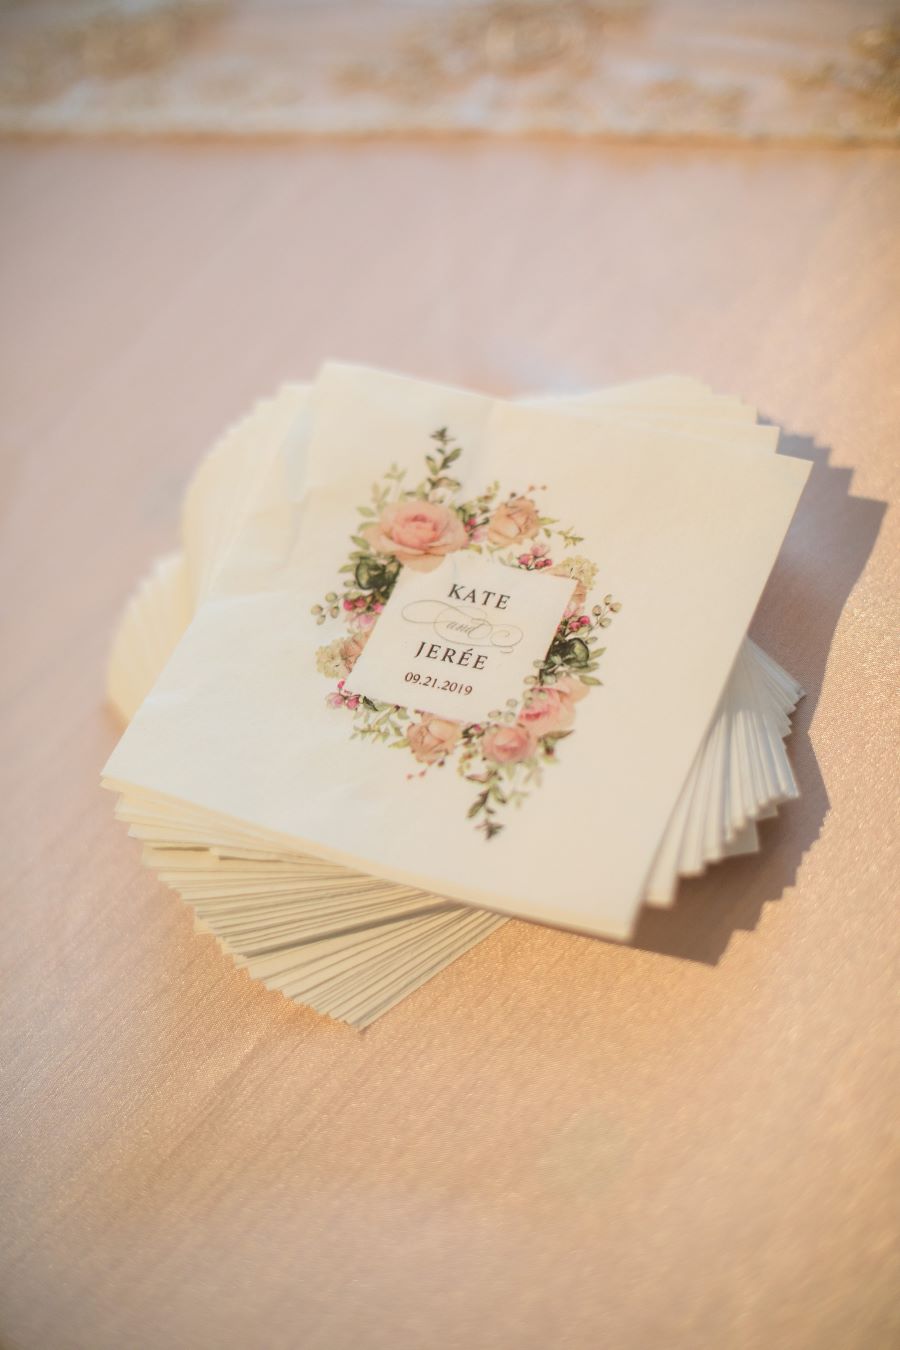 Customized napkins with both brides names and flowers for tea party wedding / Romantic / Summer / September / Pink / Dusty Rose / Cream